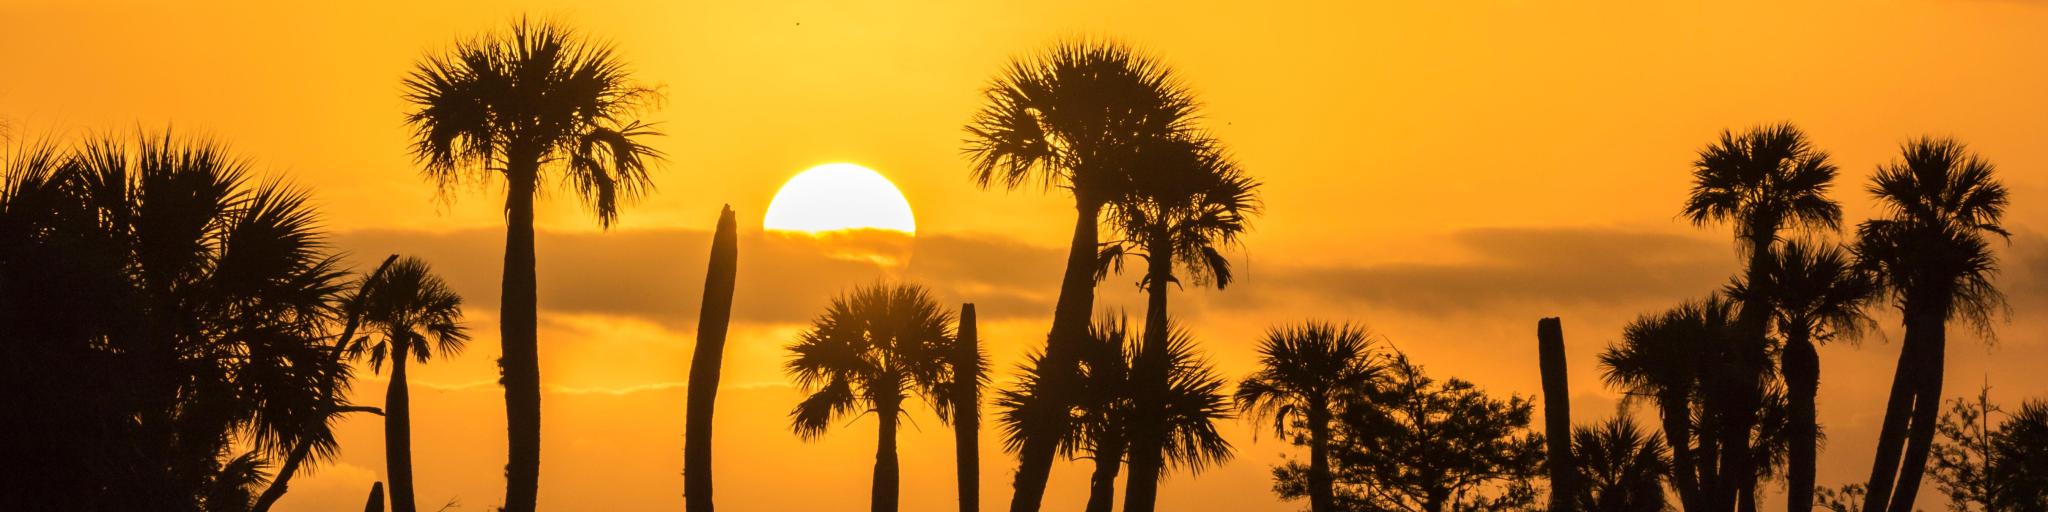 Orlando Wetlands Park, Florida, with golden sunset behind and palm tree silhouettes 